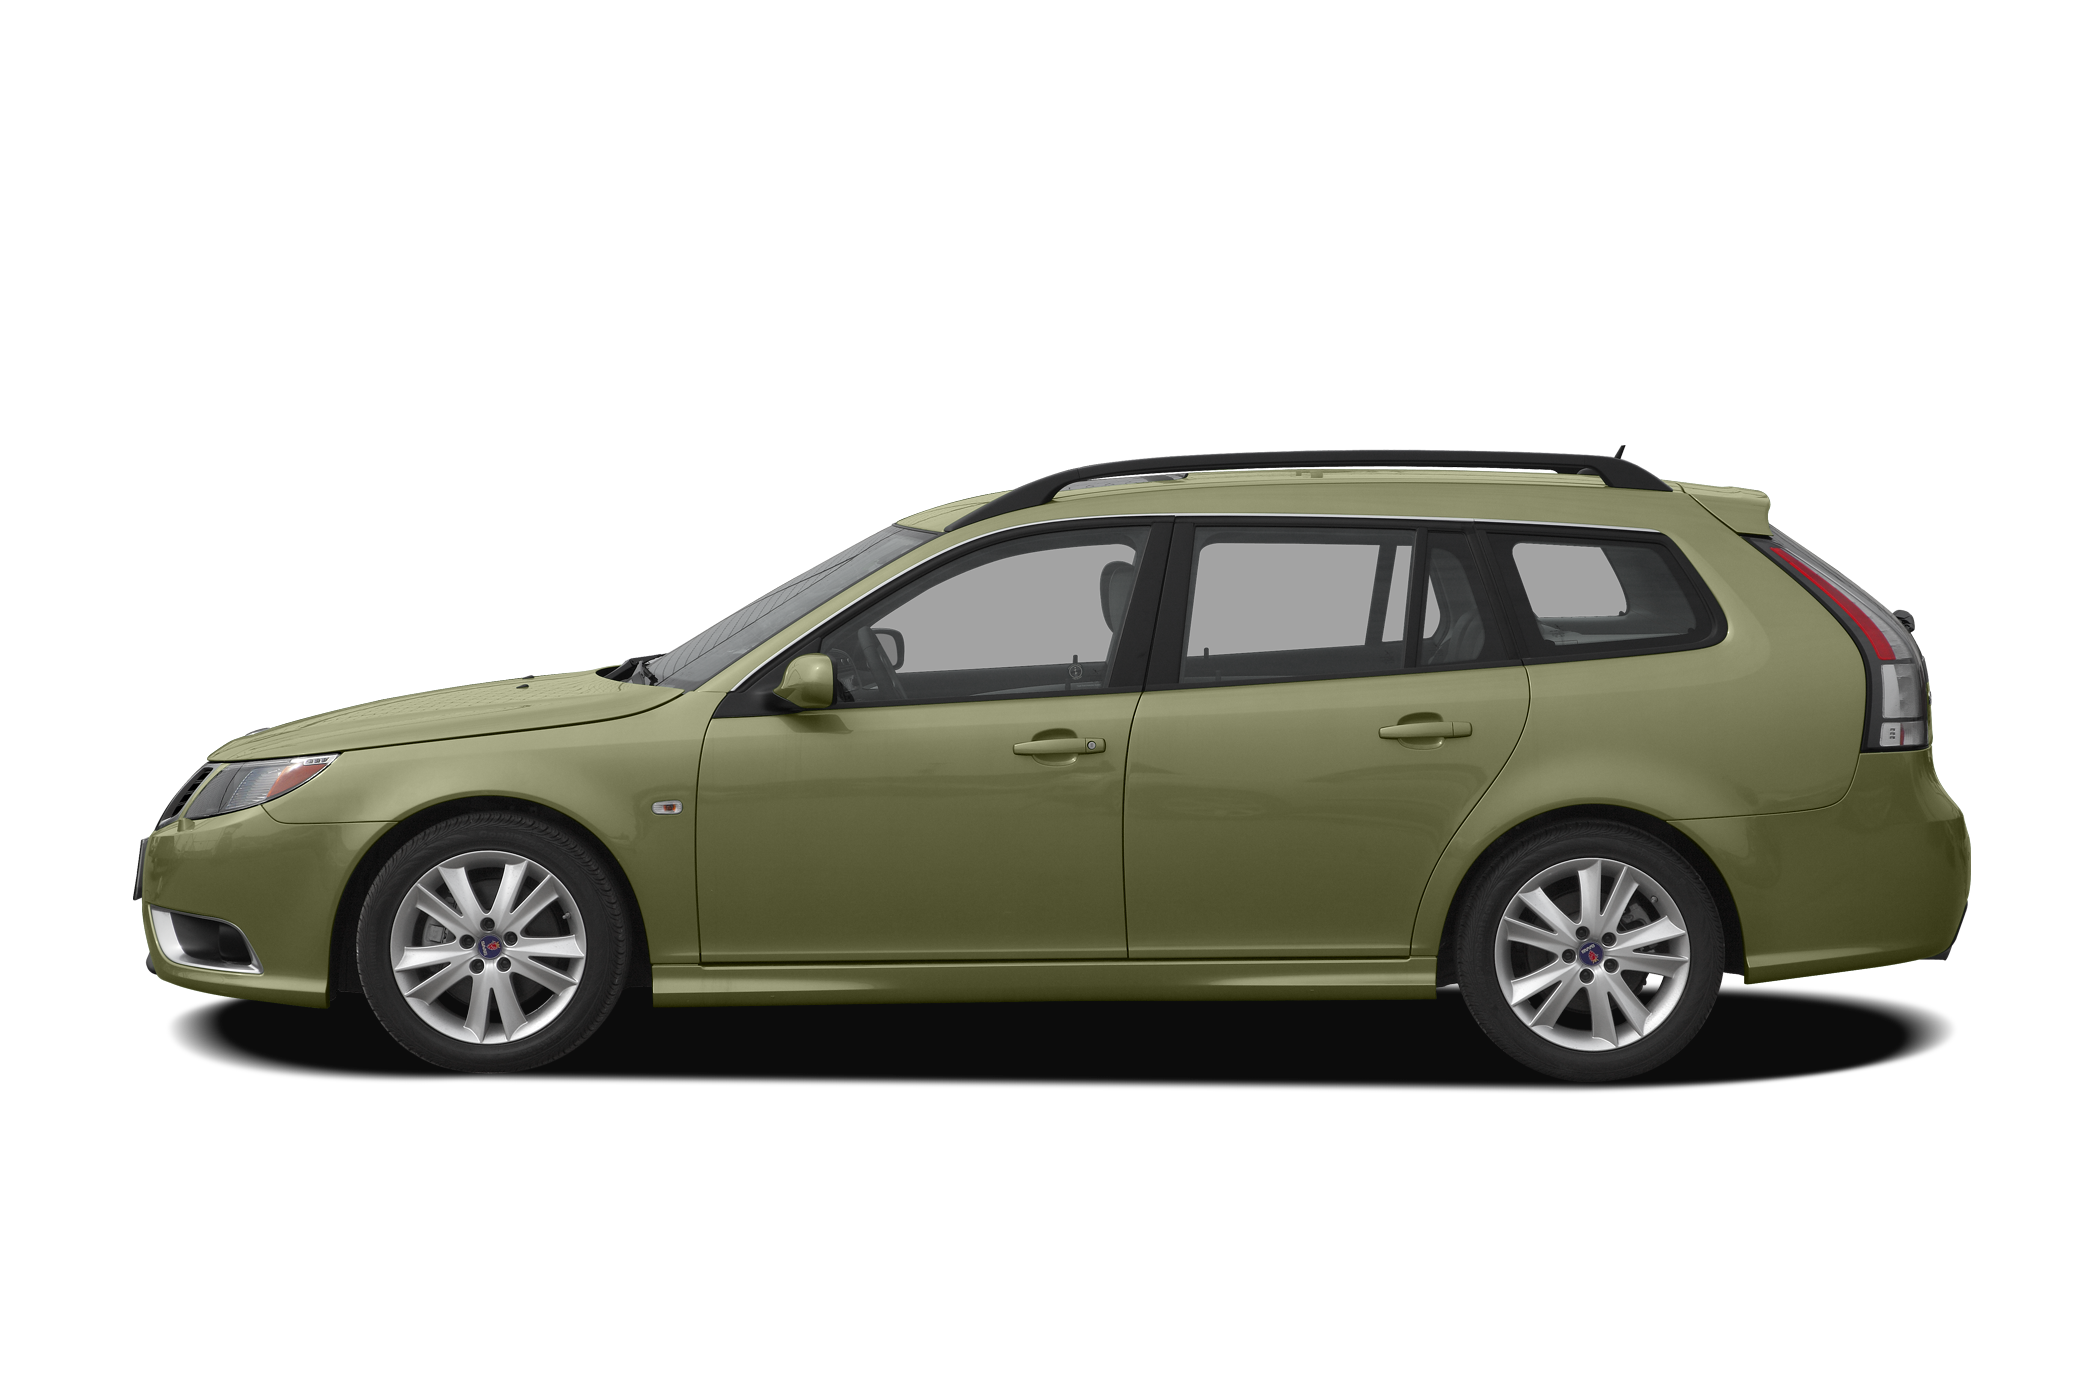 2009 Saab 9-3 - News, reviews, picture galleries and videos - The Car Guide